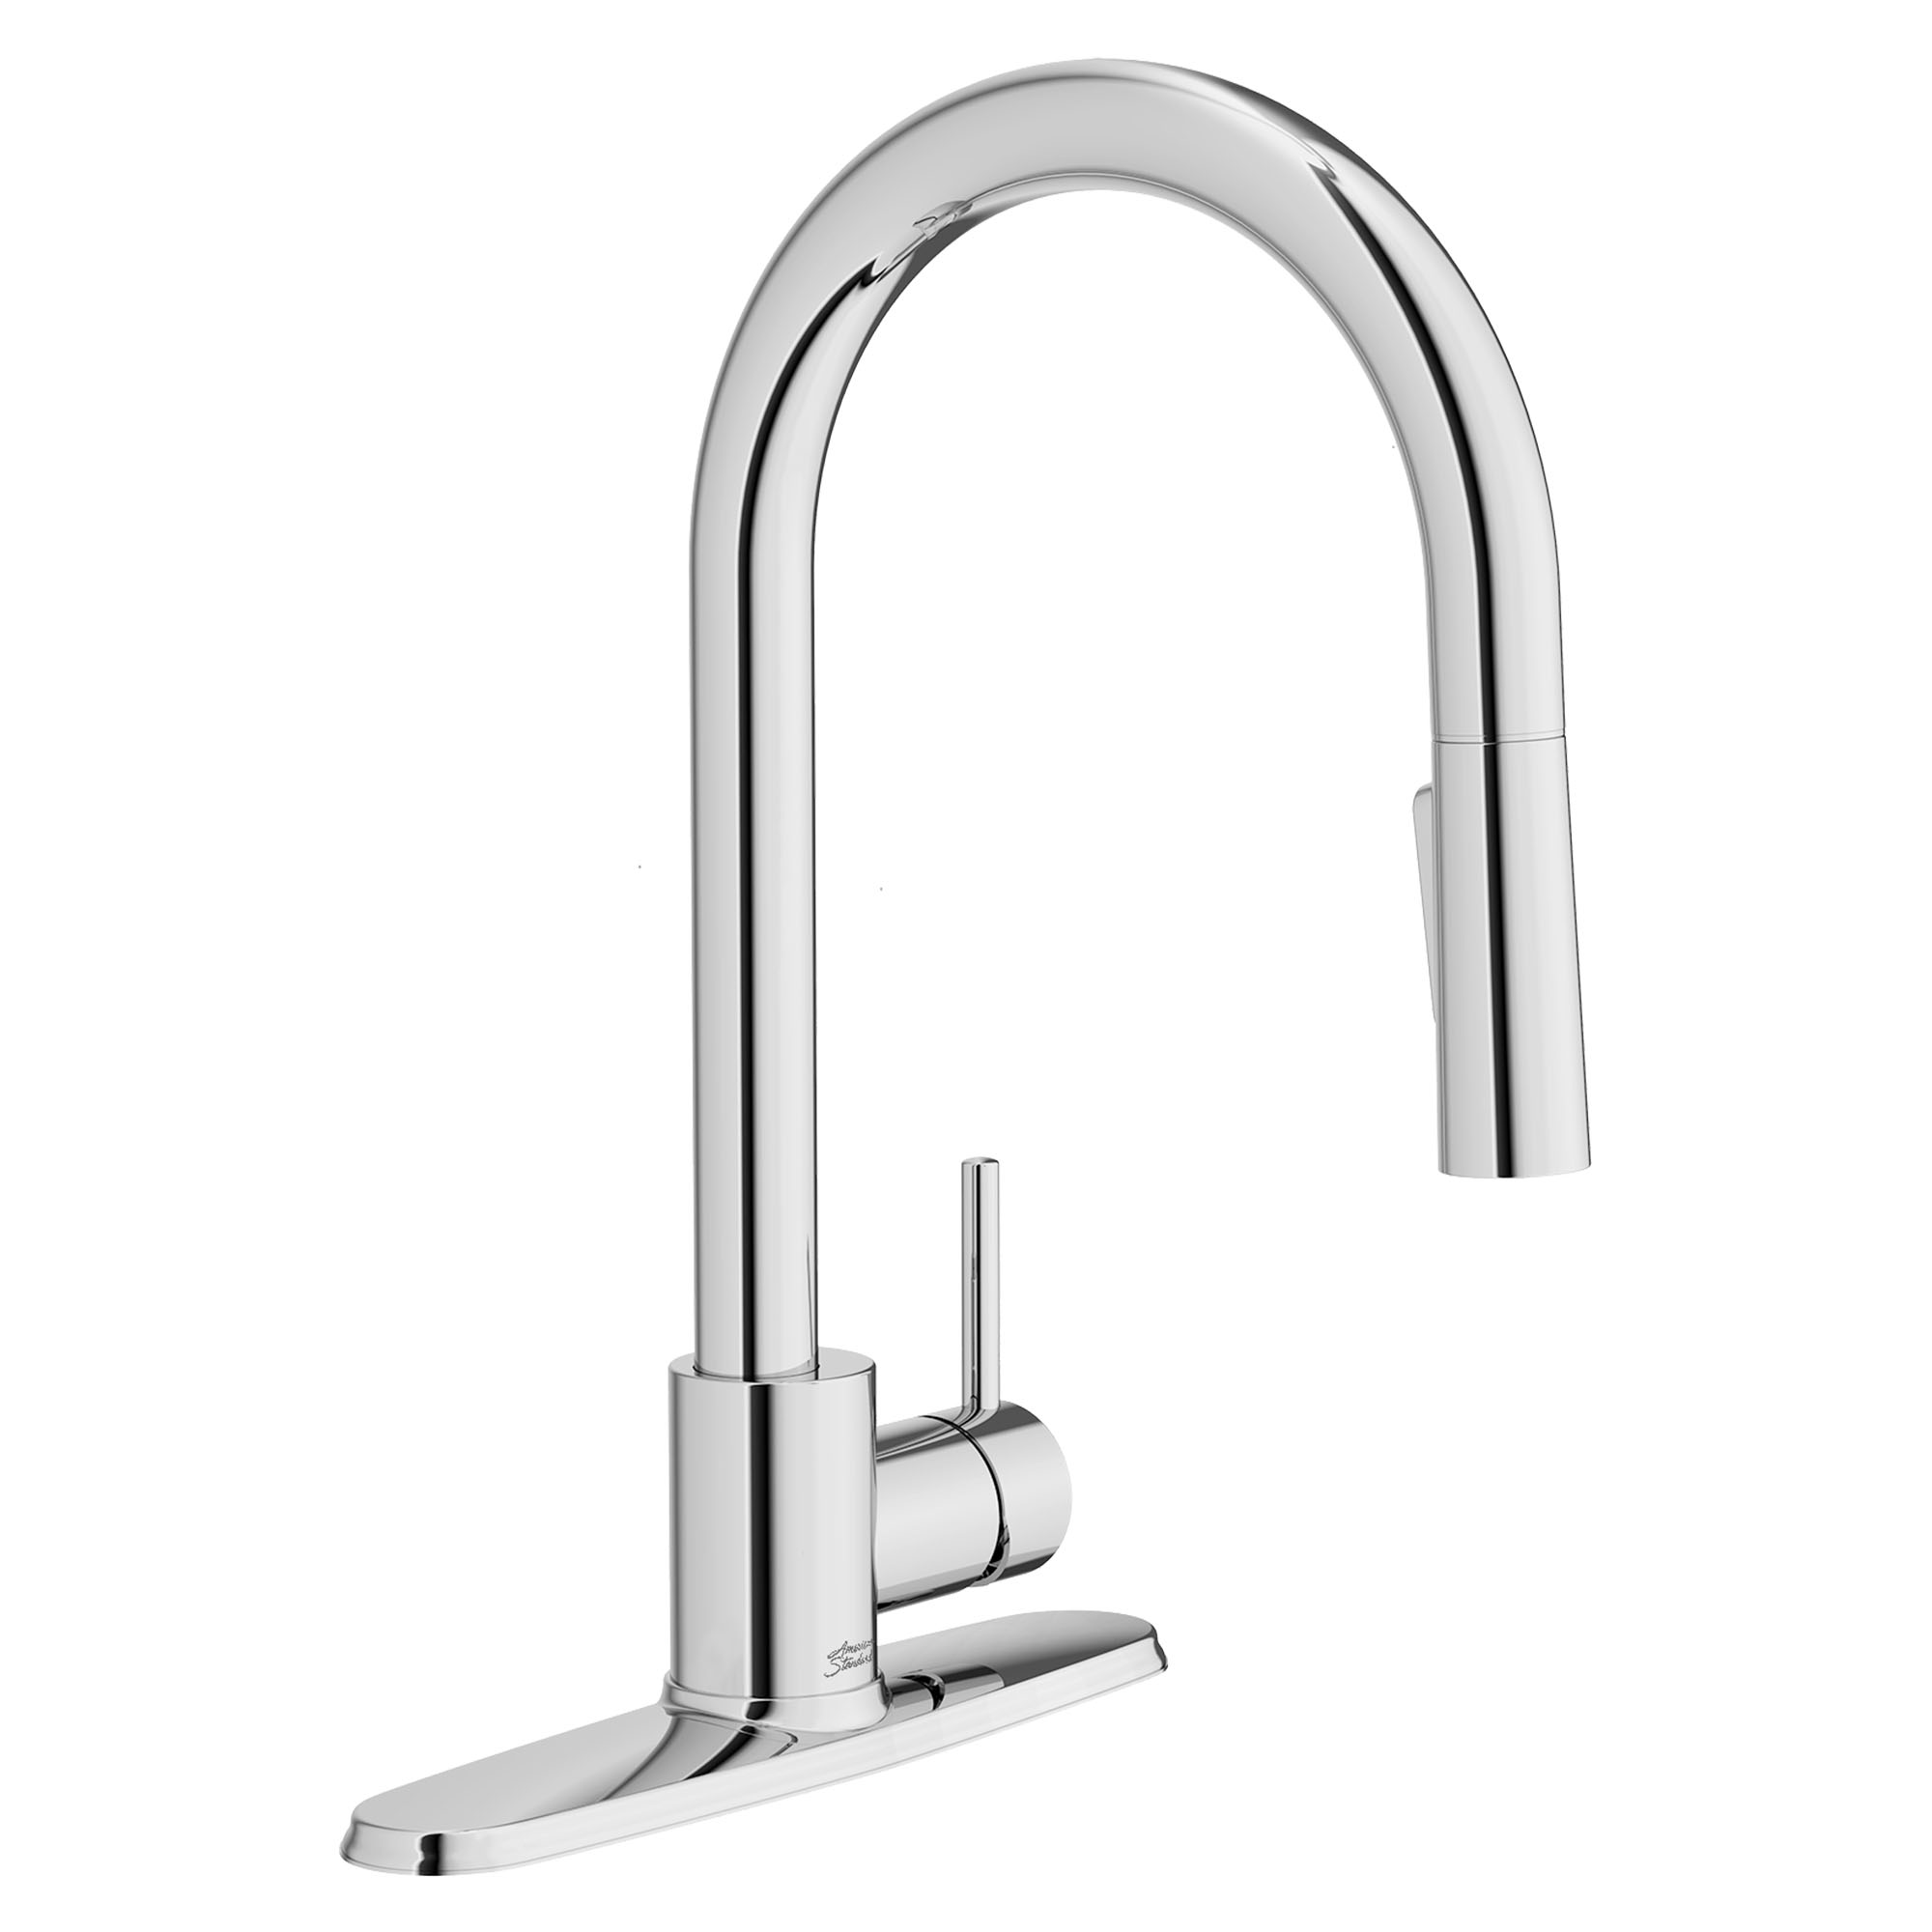 Collina Single Handle Pull-Down Dual Spray Kitchen Faucet